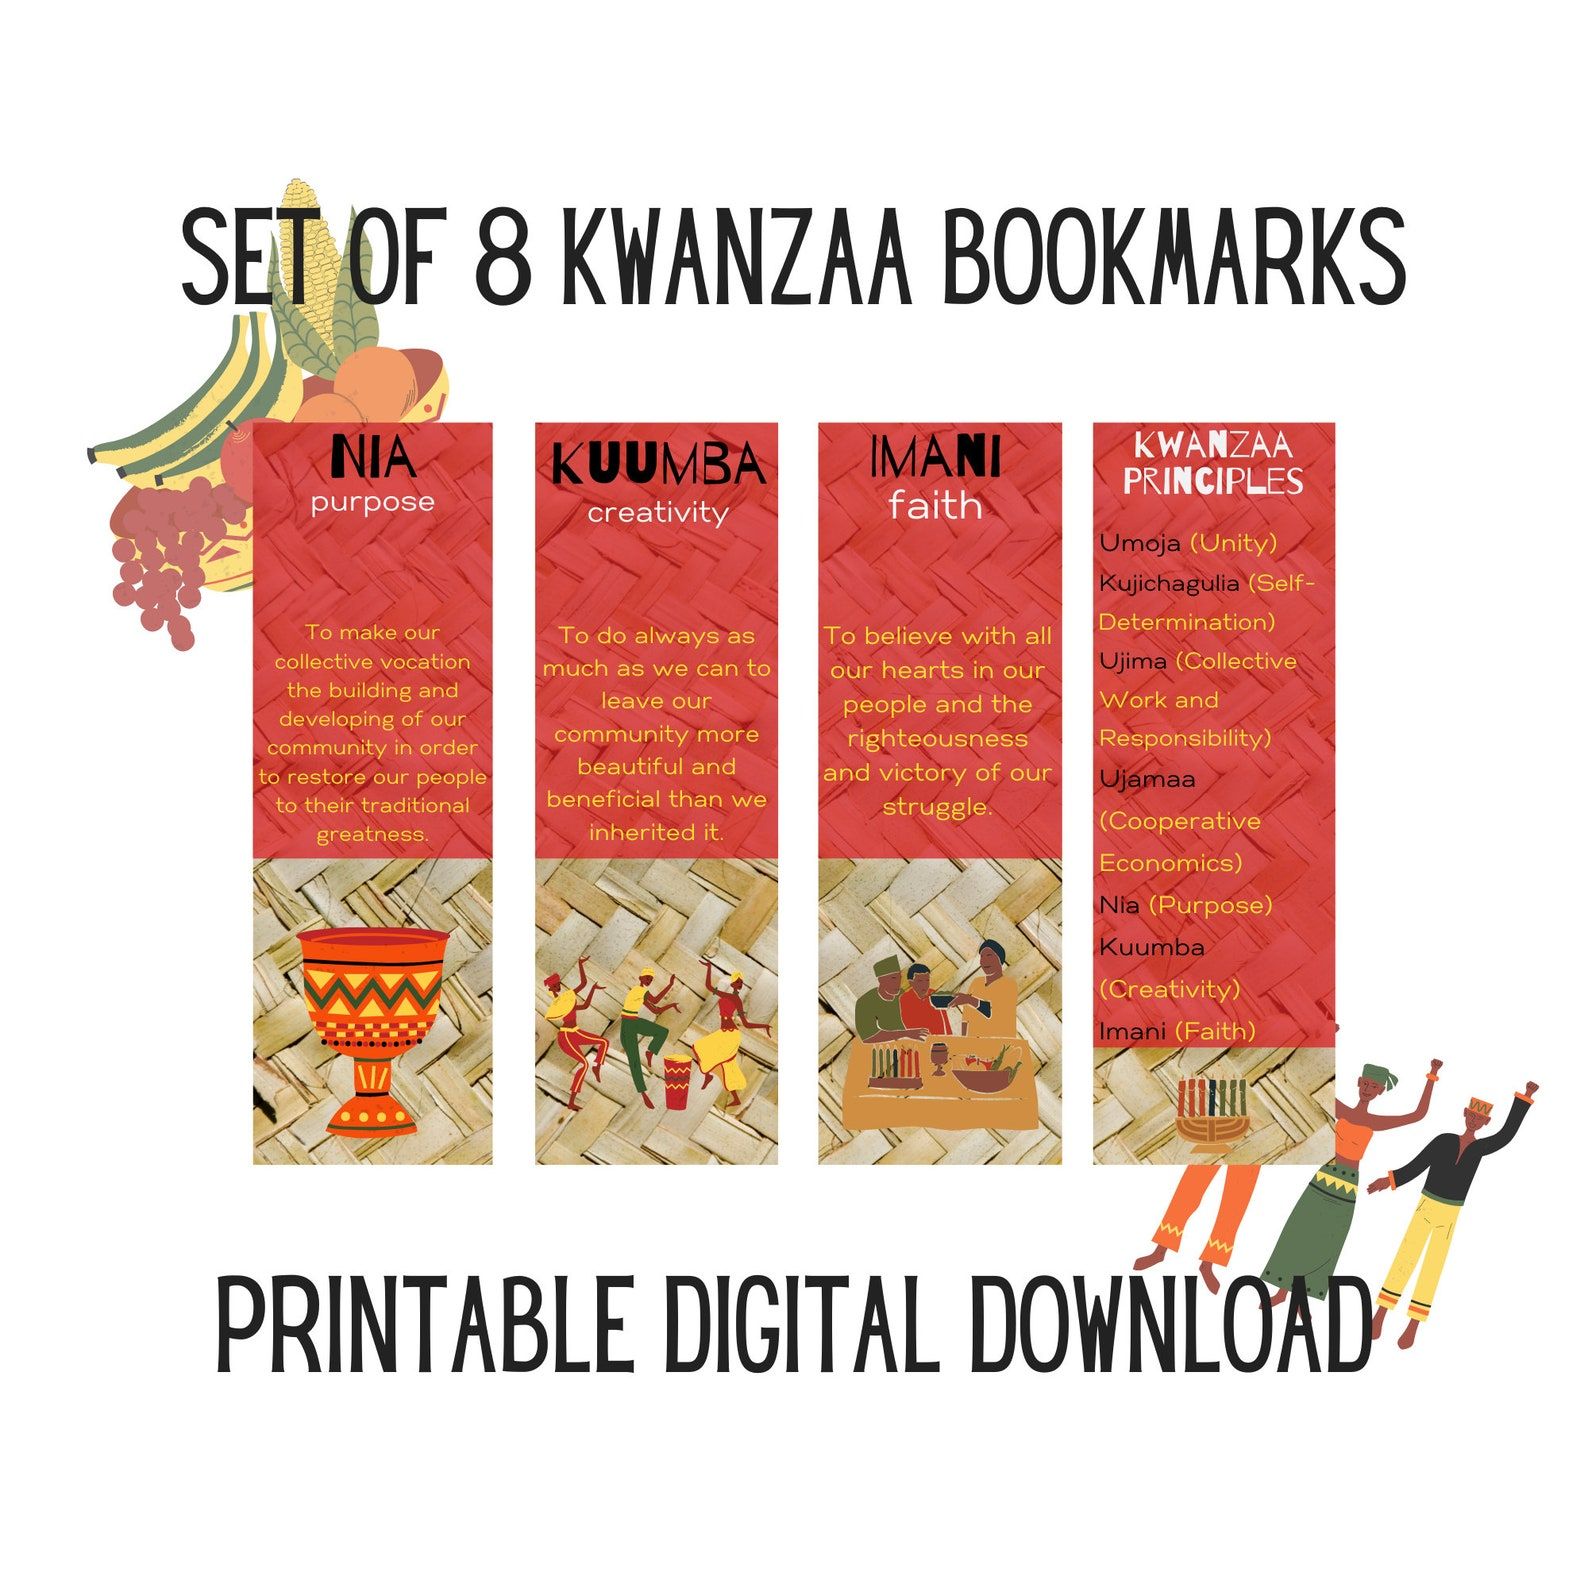 Printable set of four bookmarks. The first three include descriptions of the principals of Kwanzaa in yellow text on a red background. The final bookmark features all of the principles in black and yellow text on a red background. 